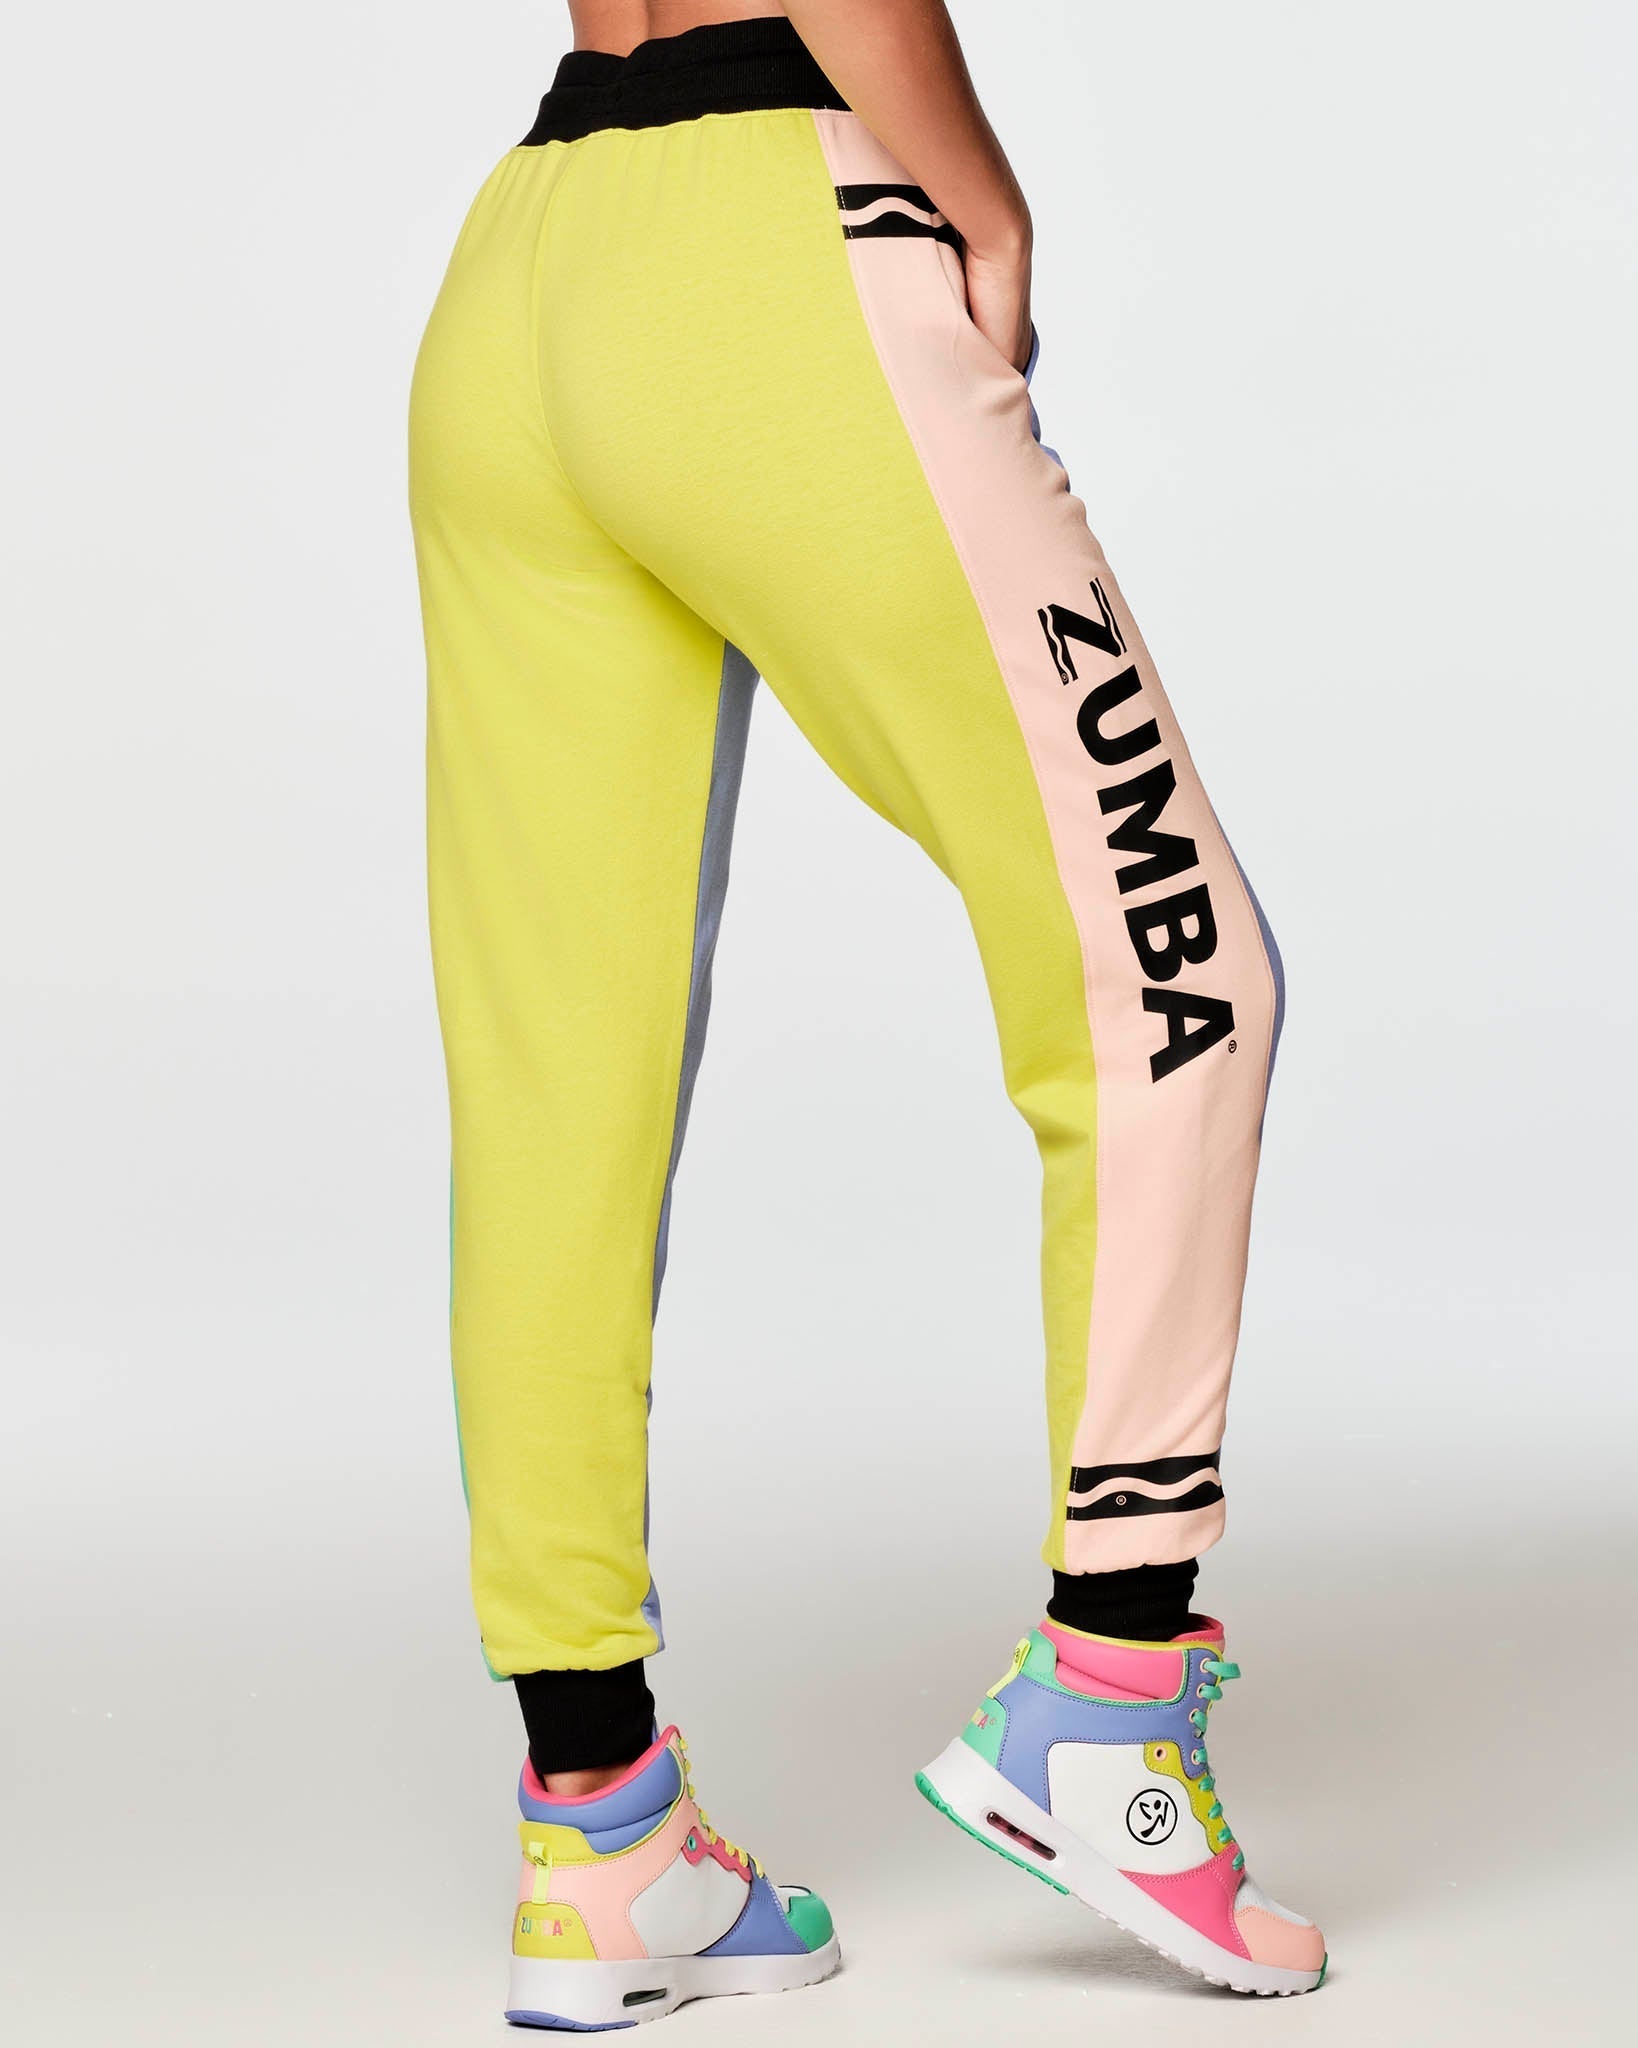 Is Crayola partnering with Zumba on a collection of activewear